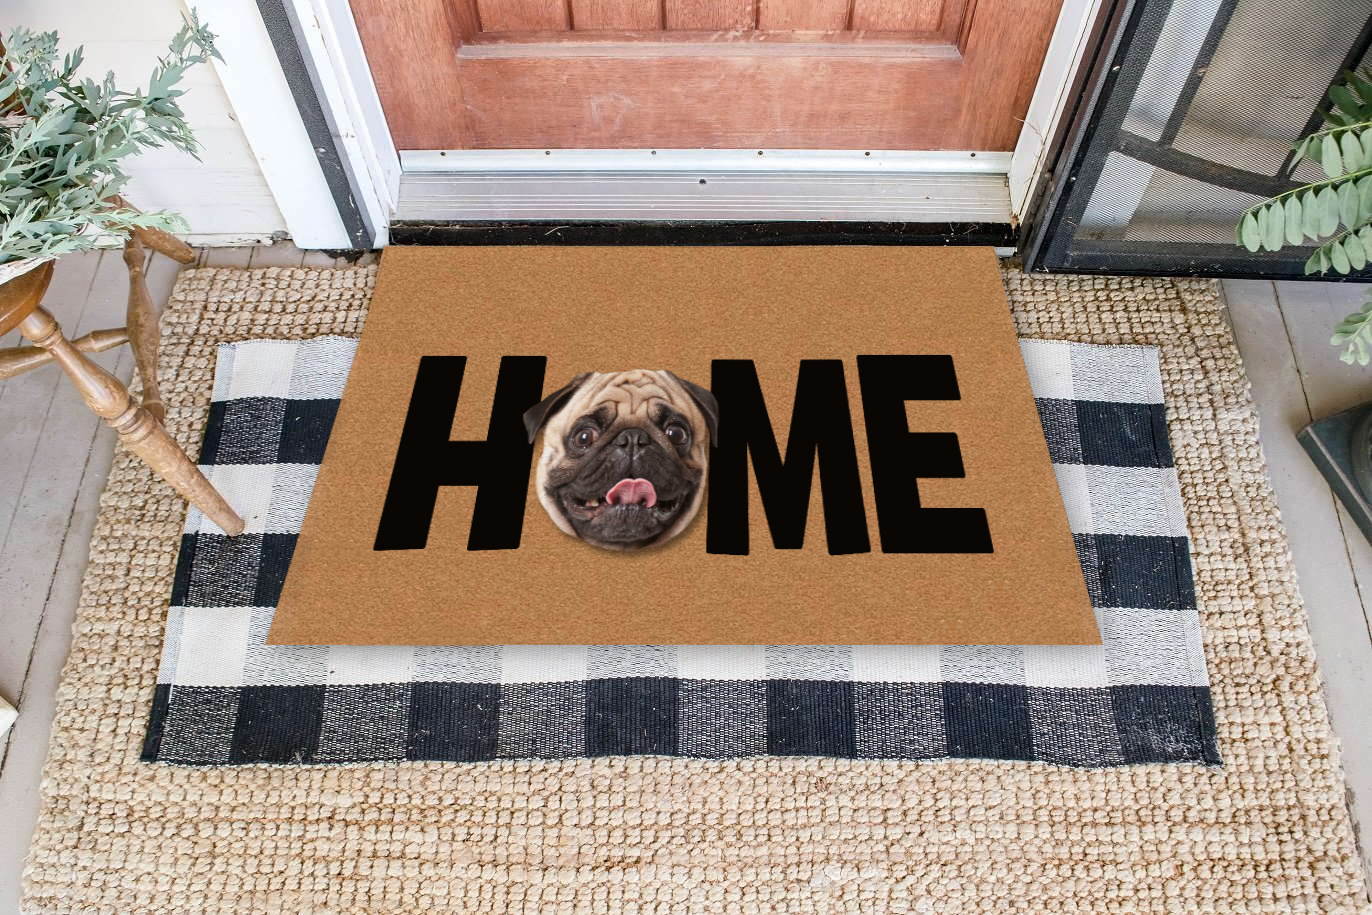 https://passionify.com/wp-content/uploads/2020/06/Custom-Dog-Face-Photo-HOME-Welcome-Doormat-Housewarming-Gift-1.jpg